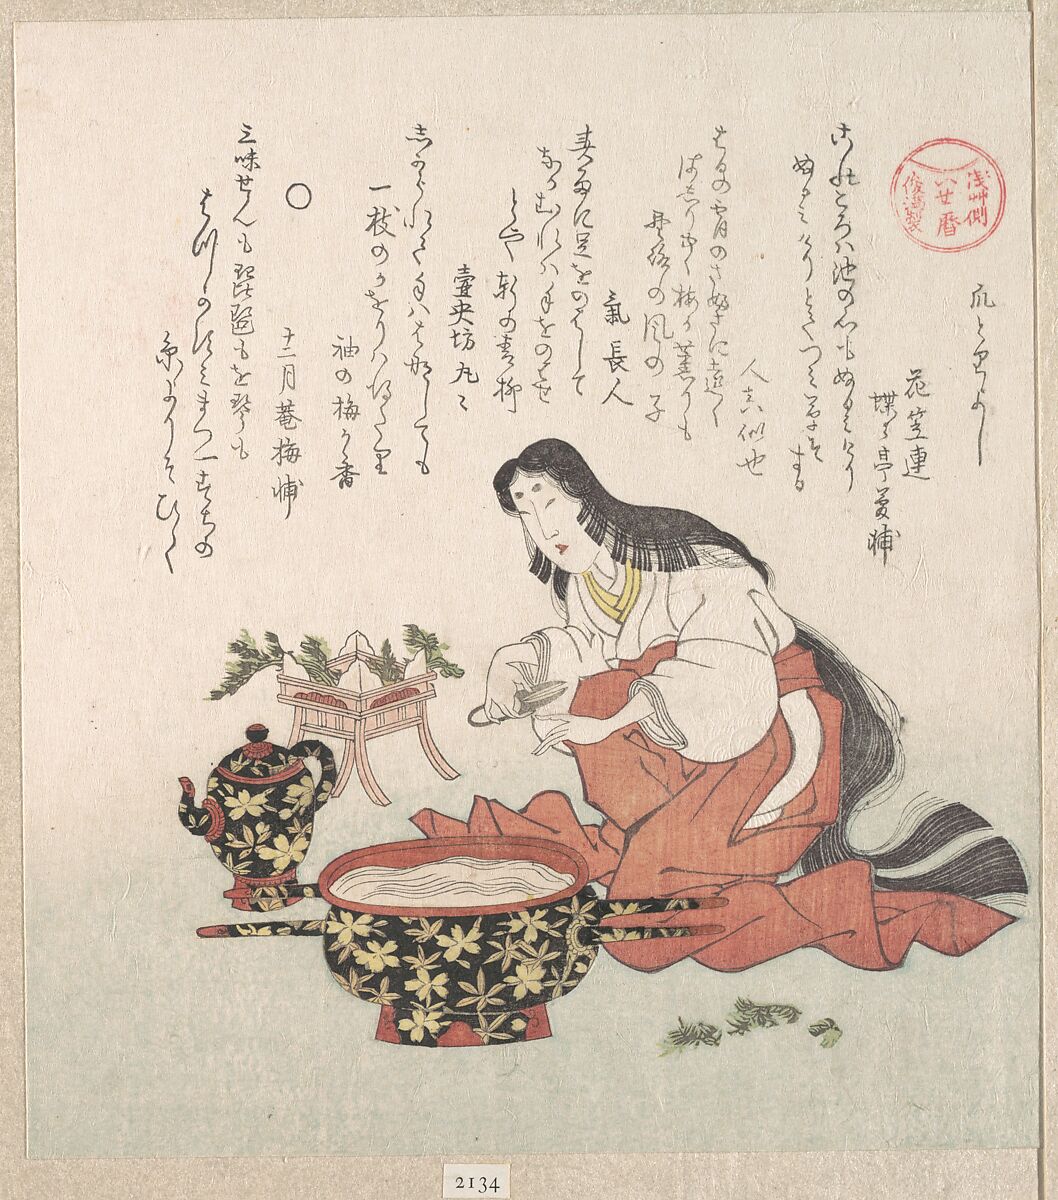 Woman Cutting Her Nails after GatHering Herbs, Kubo Shunman (Japanese, 1757–1820) (?), Woodblock print (surimono); ink and color on paper, Japan 